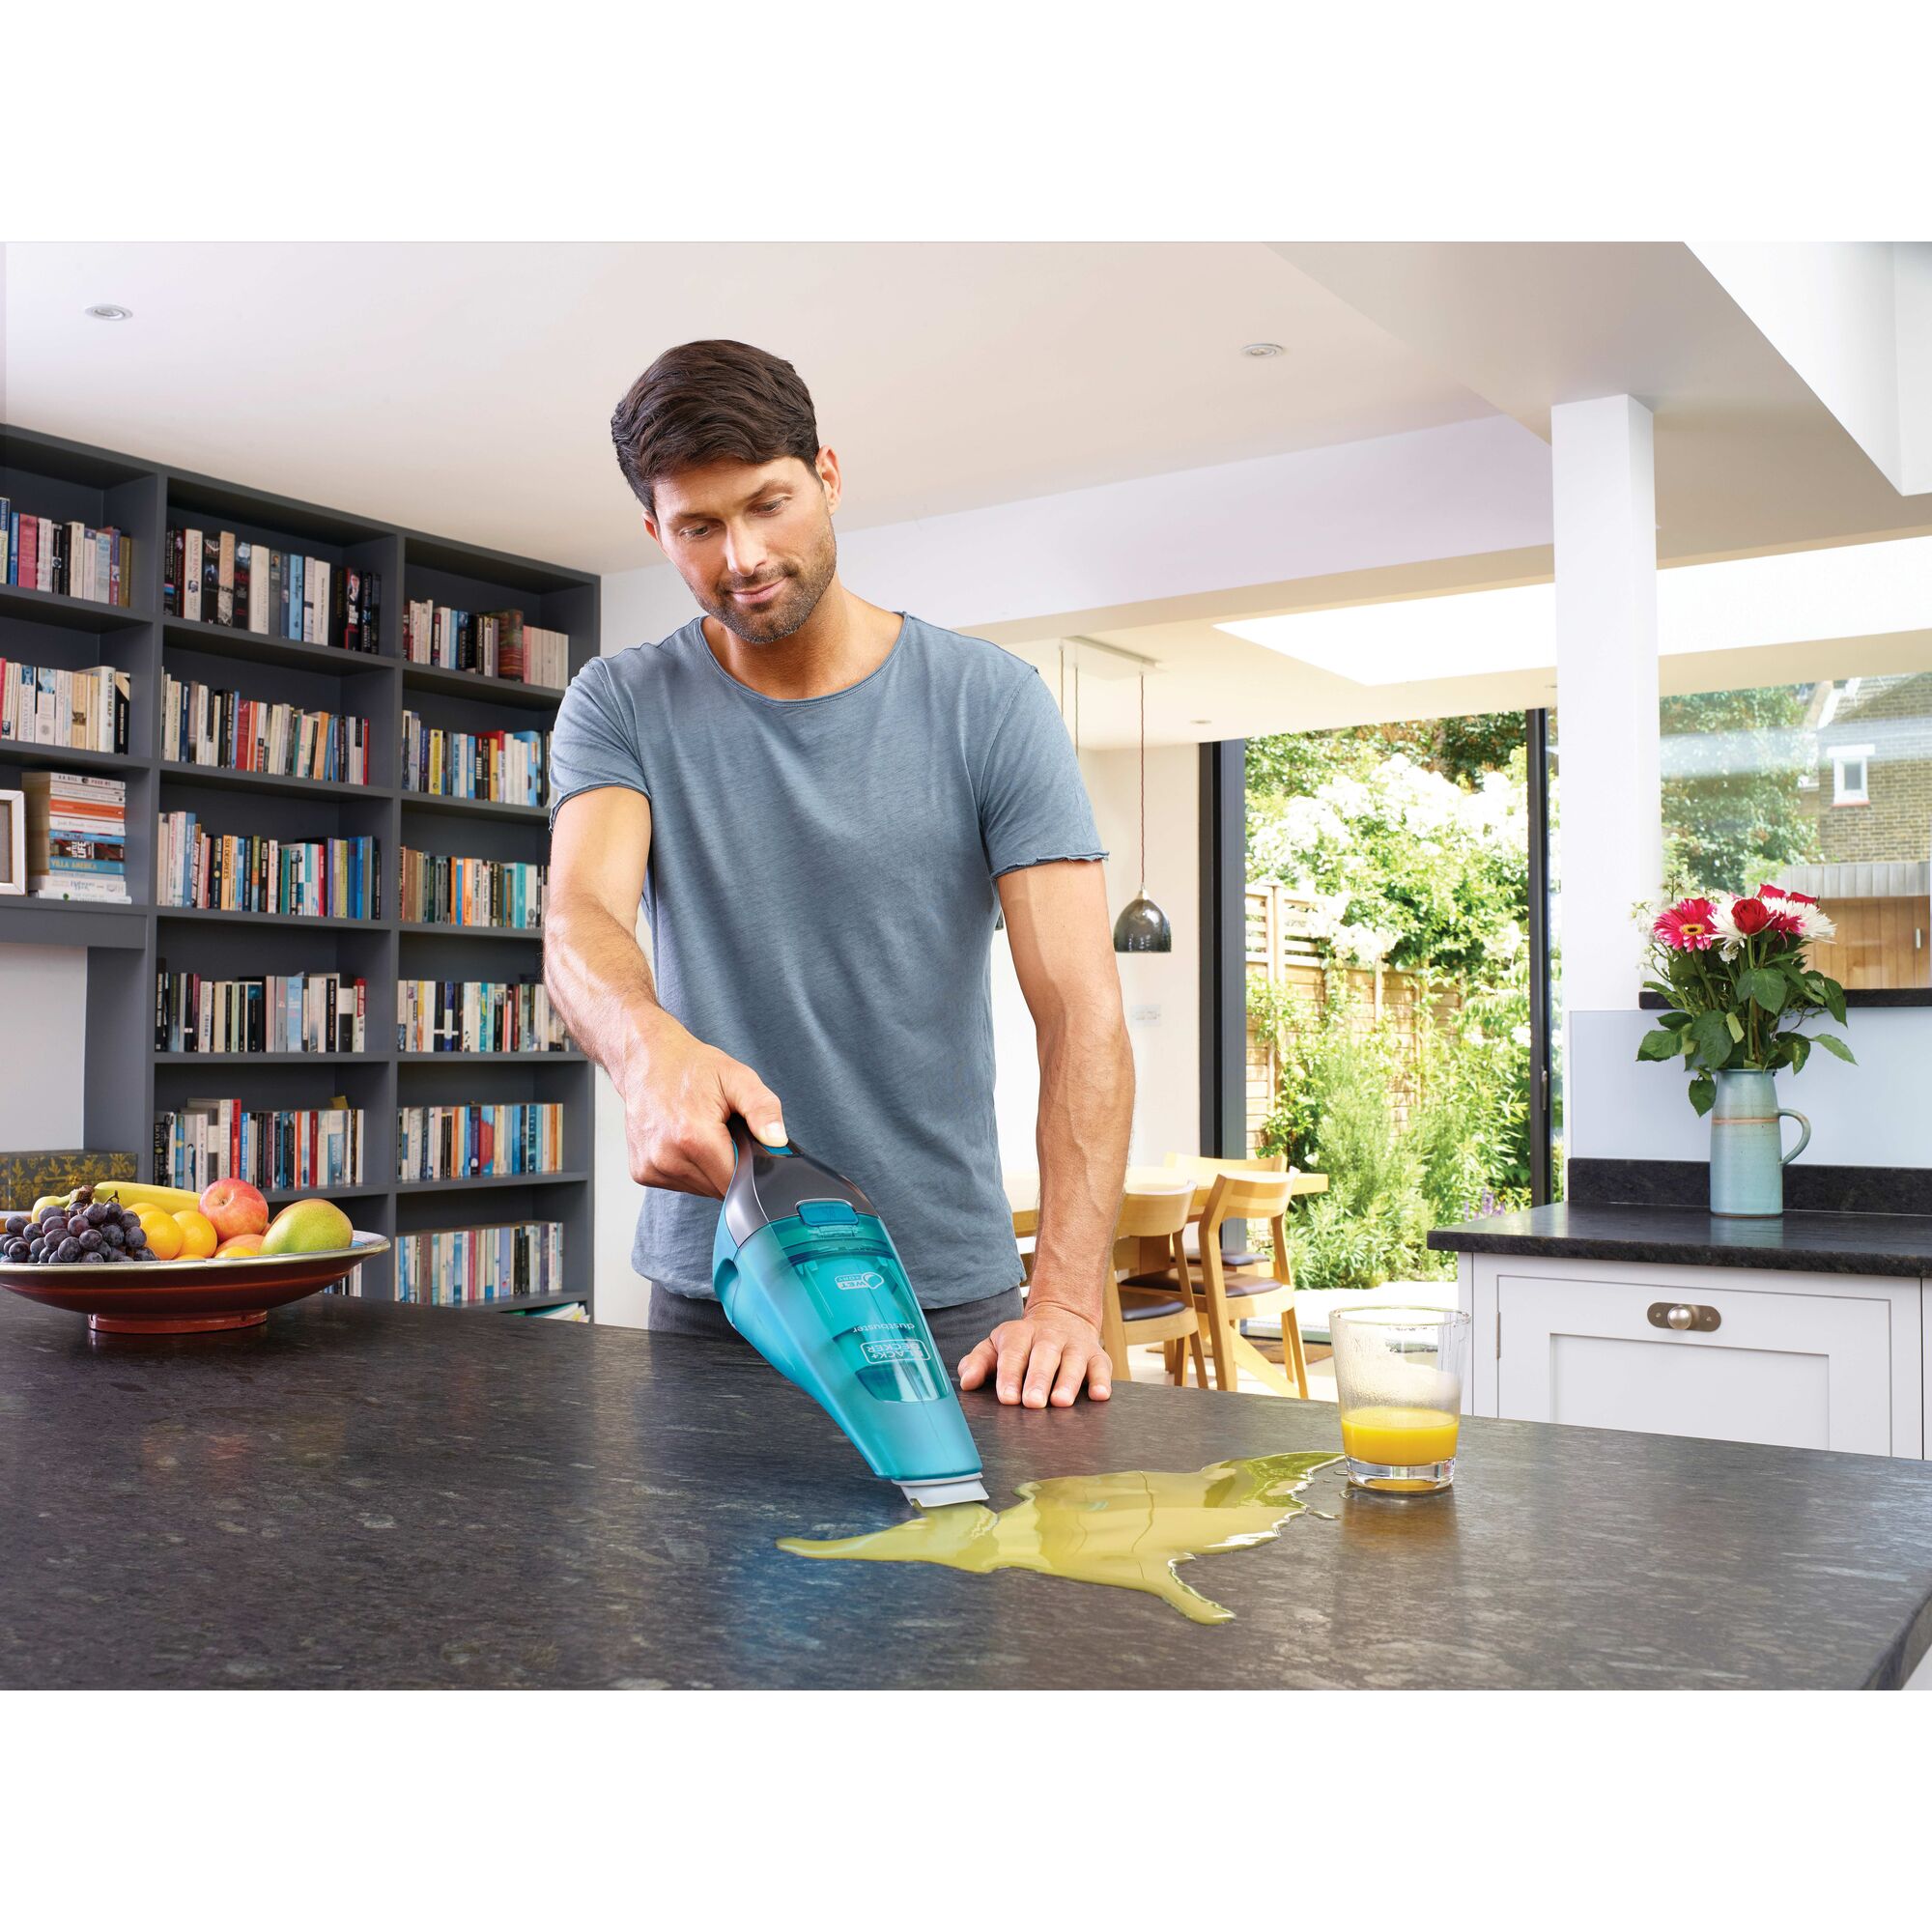 Dustbuster QuickClean Cordless Hand Vacuum Wet or Dry being used by person to clean spilled juice from countertop.